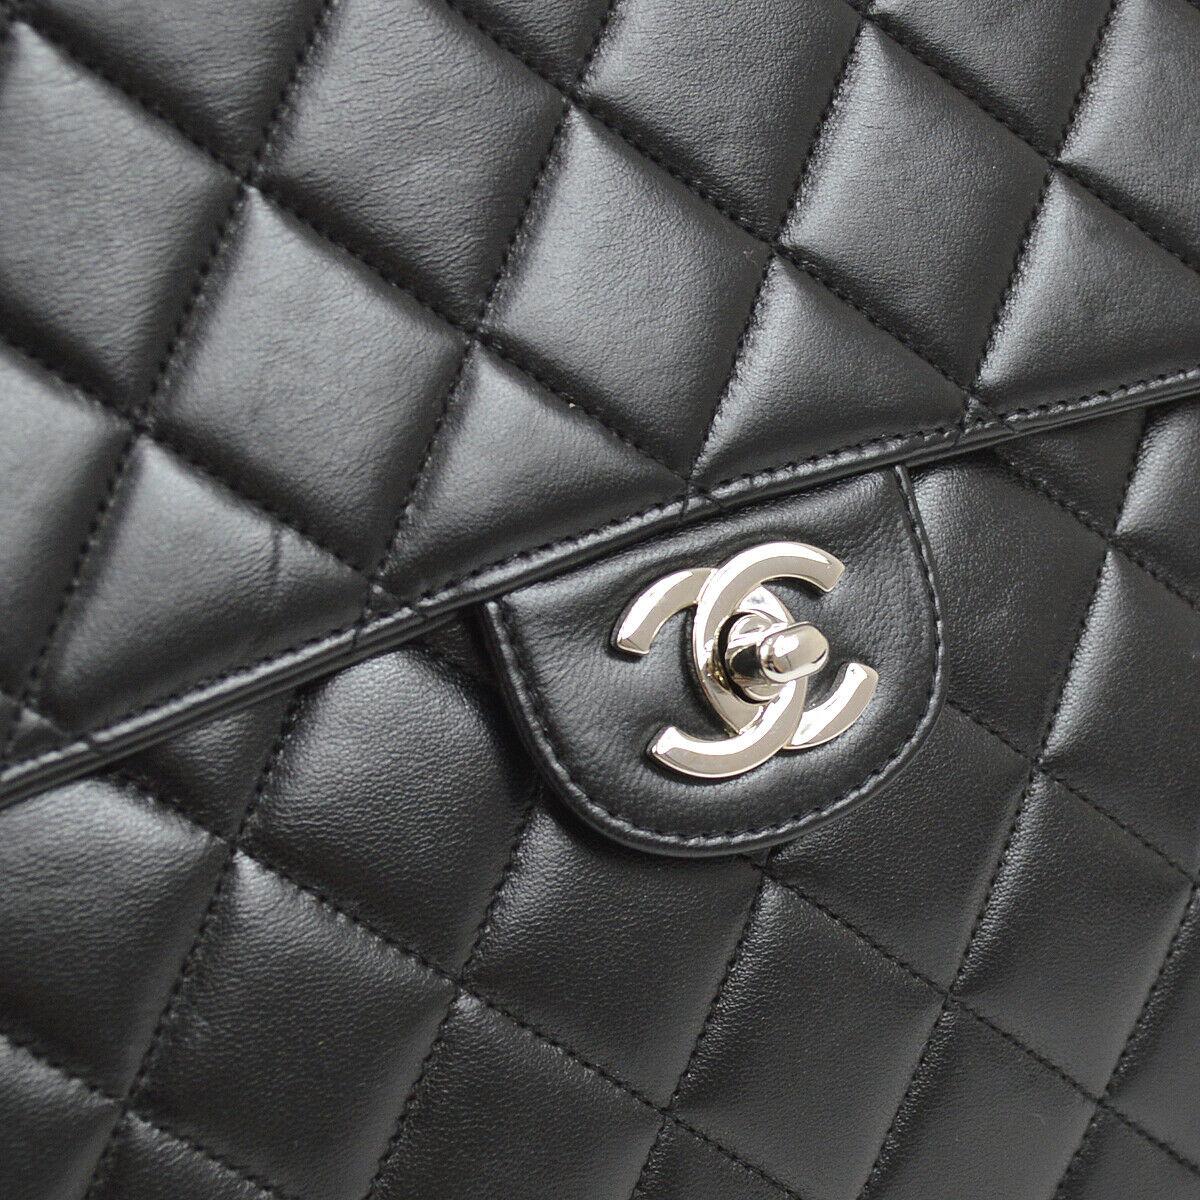 Chanel Black Lambskin Leather Silver Jumbo Evening Shoulder Flap Bag

Lambskin leather
Silver tone hardware
Turnlock closure
Leather lining
Date code present 
Shoulder strap drop 24.5